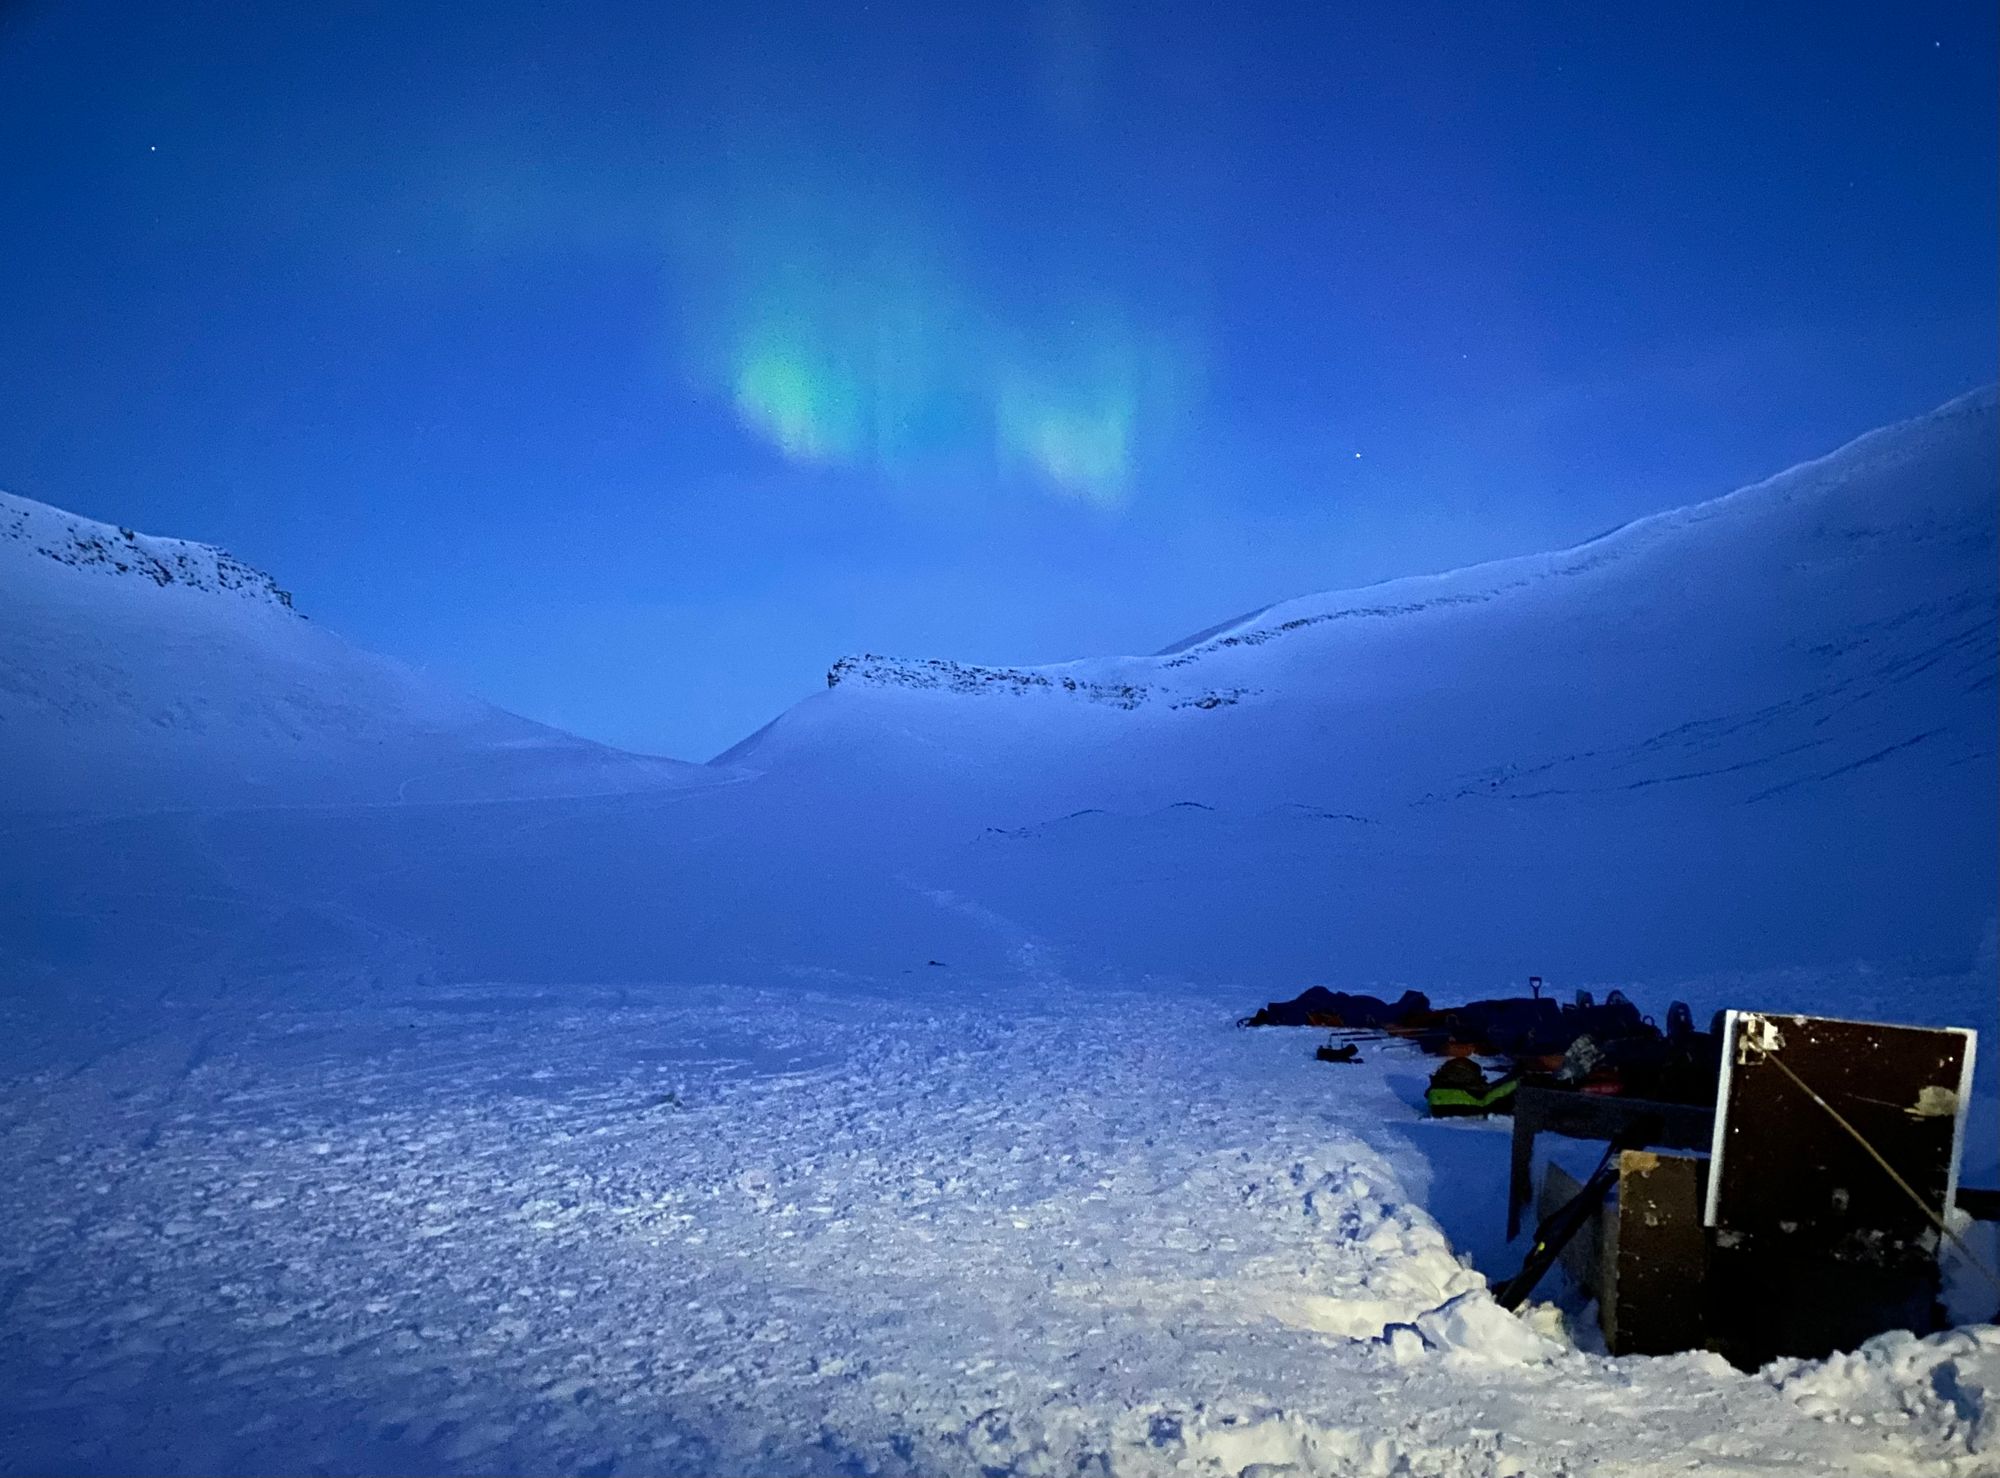 Aurora above a snowy landscape, with a hatch leading undergroud